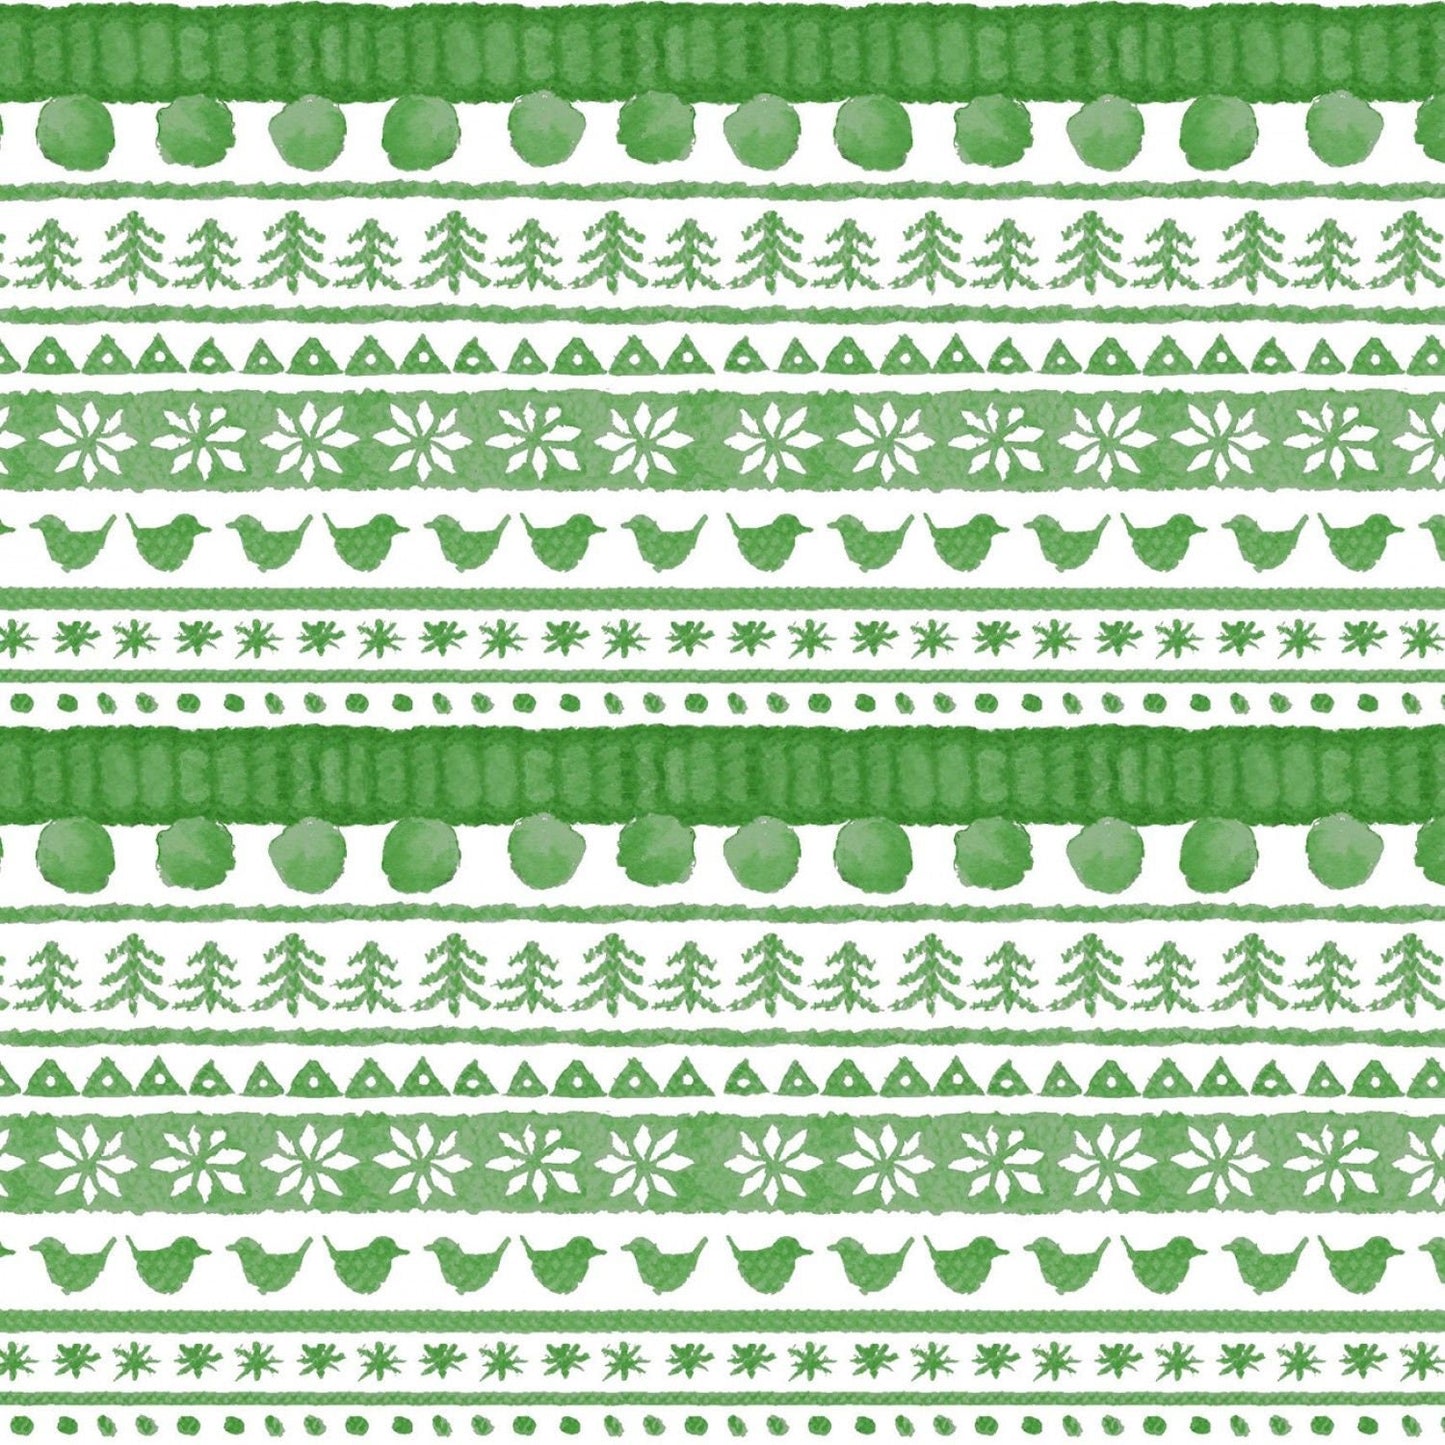 Warm Wishes by Hannah Dale of Wrendale Designs Sweater Stripe Green D6314M-G Digitally Printed Cotton Woven Fabric